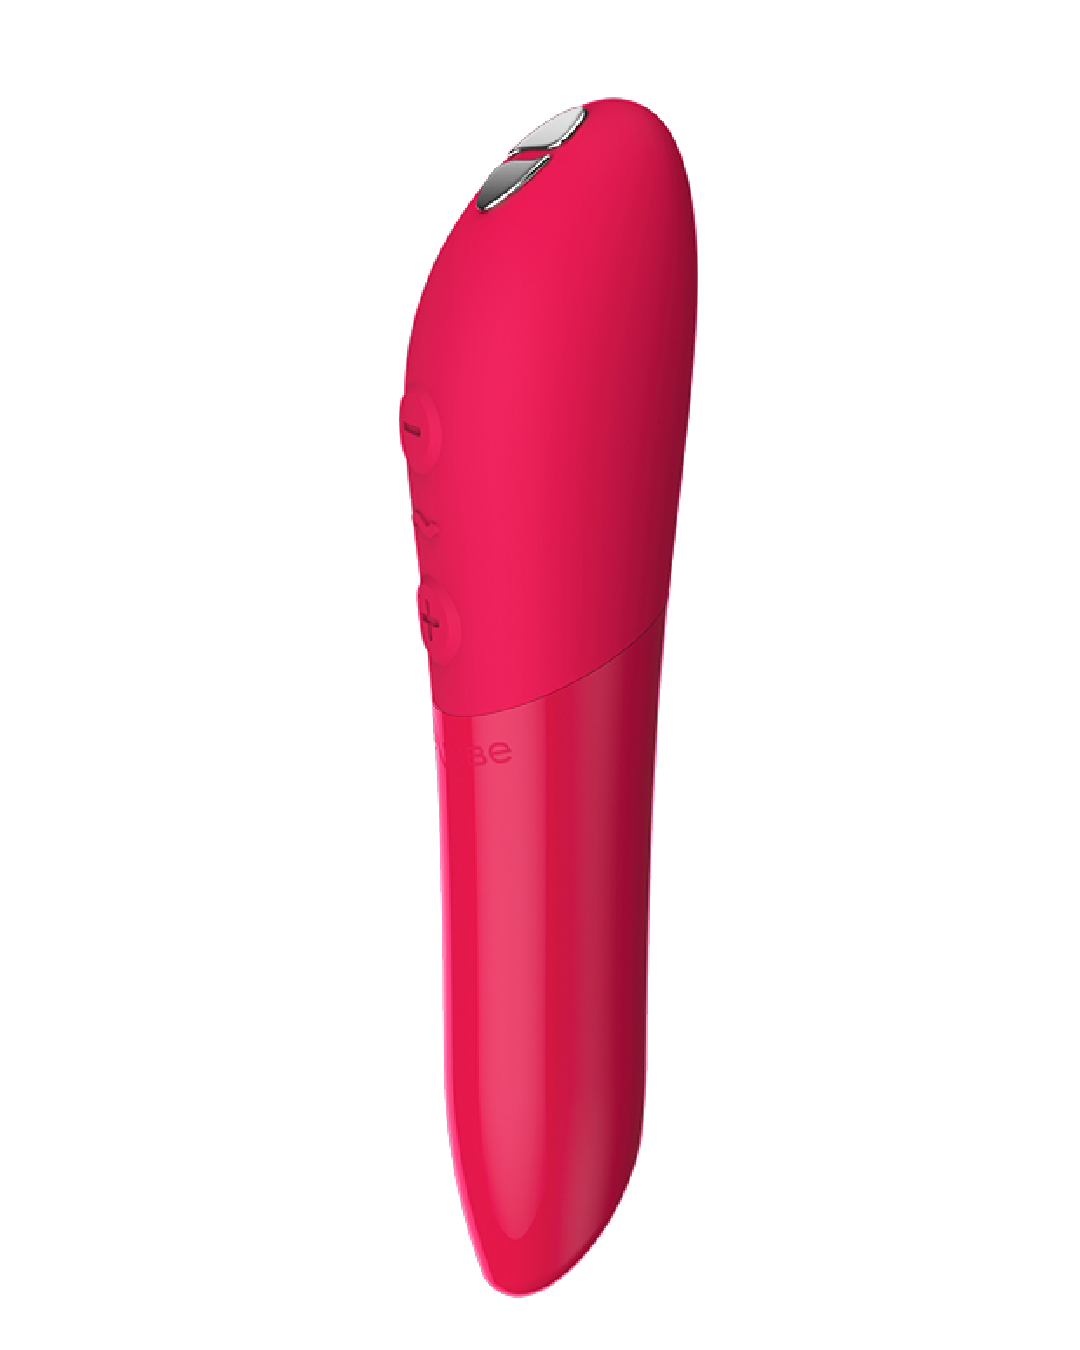 We-Vibe Tango X Powerful Bullet Vibrator - Cherry Red side view on a white background showing the angled tip